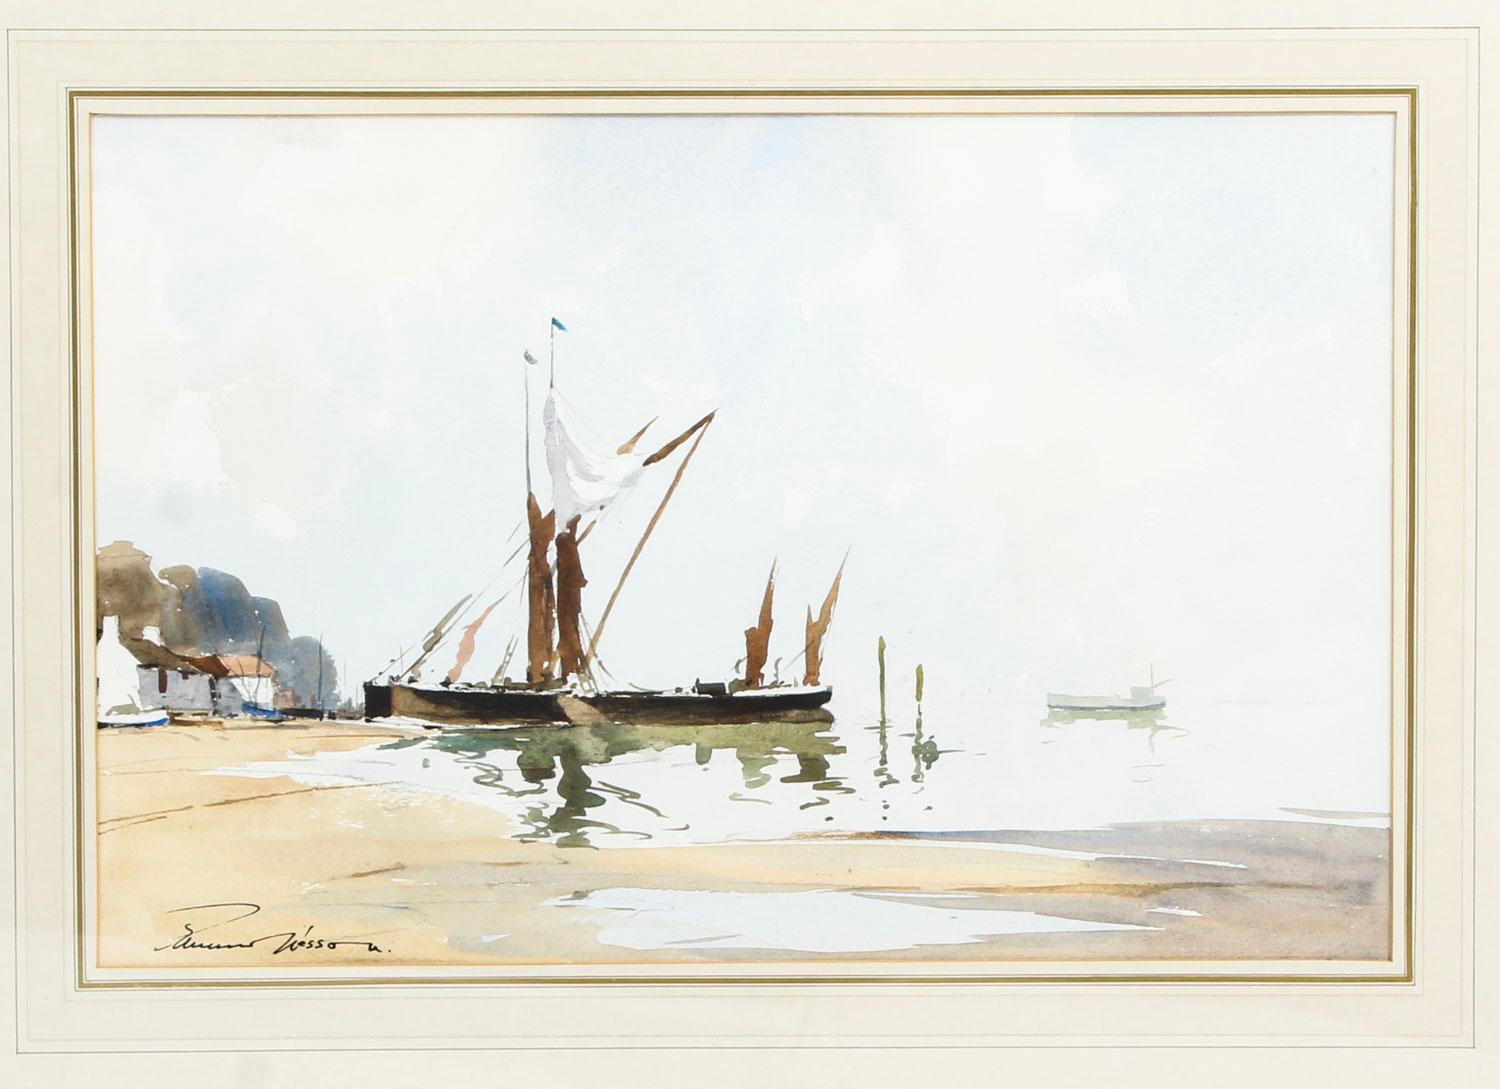 Vintage English watercolor landscape by Edward Wesson British, (1910-1983) circa 1960 in date.

This wonderful watercolour features a tranquil landscape of the hamlet of Pin Mill on the south bank of the River Orwell with sailing boats and